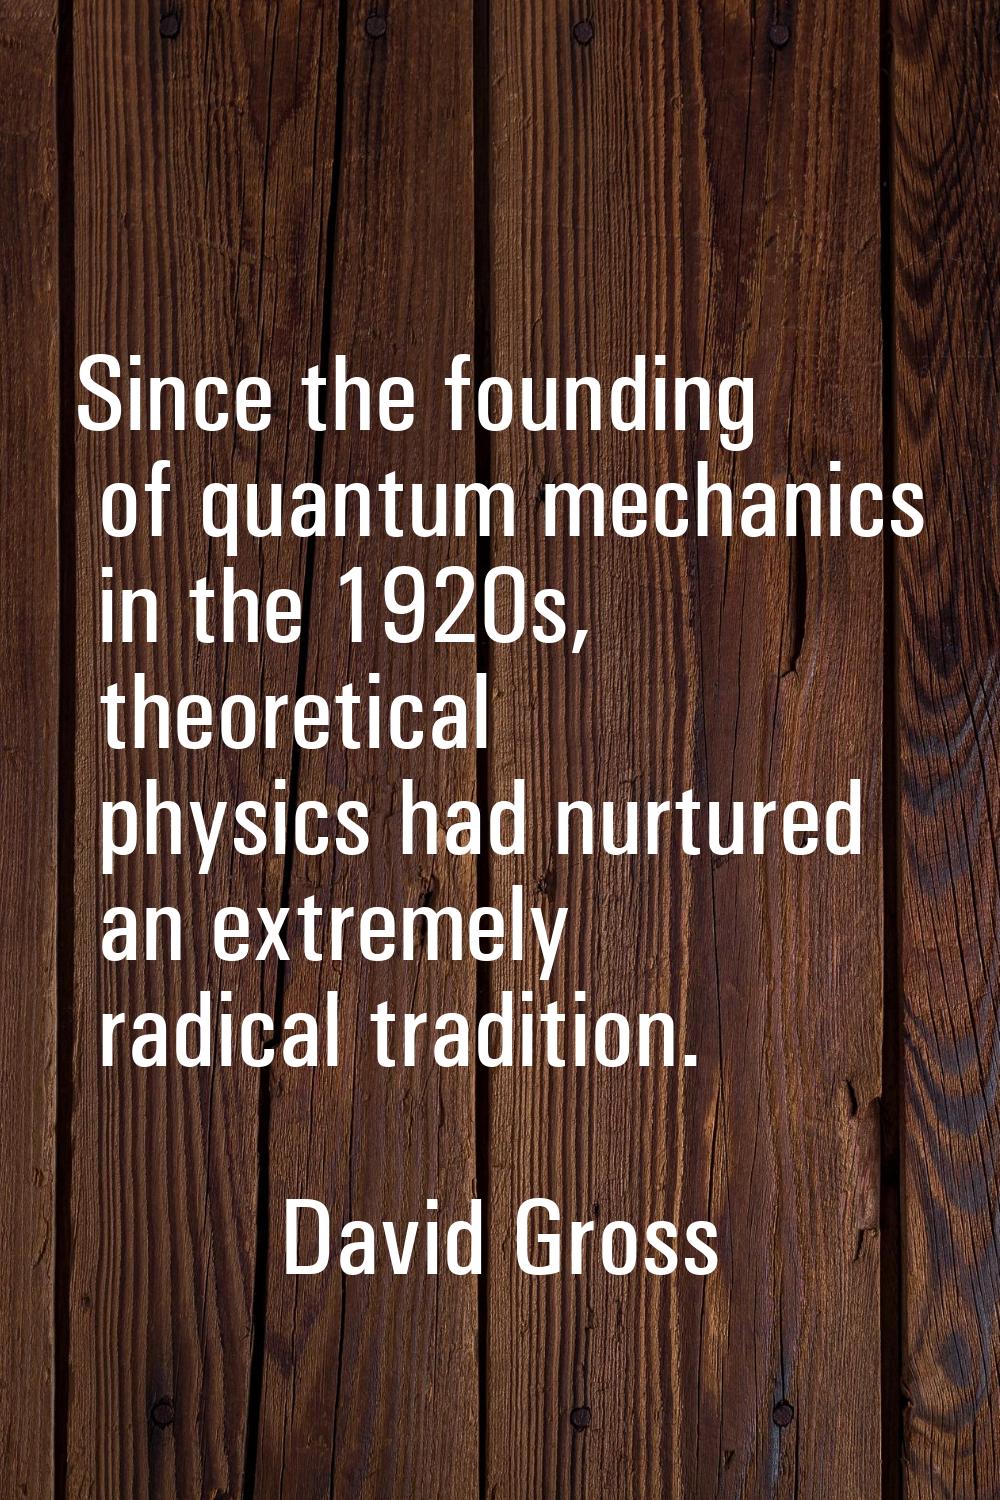 Since the founding of quantum mechanics in the 1920s, theoretical physics had nurtured an extremely